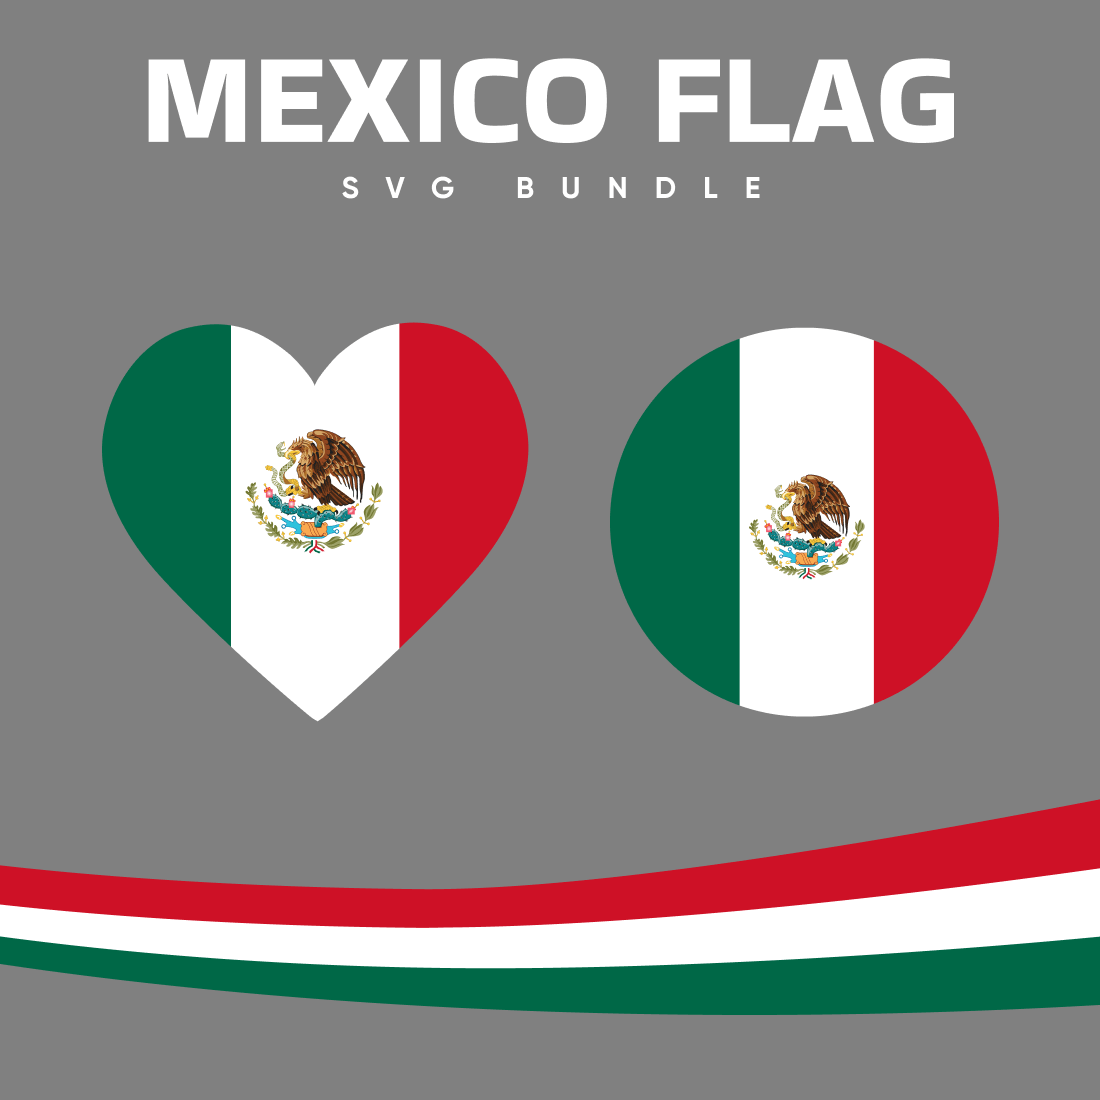 Mexico Flag Includes Green, White and Red Colors.